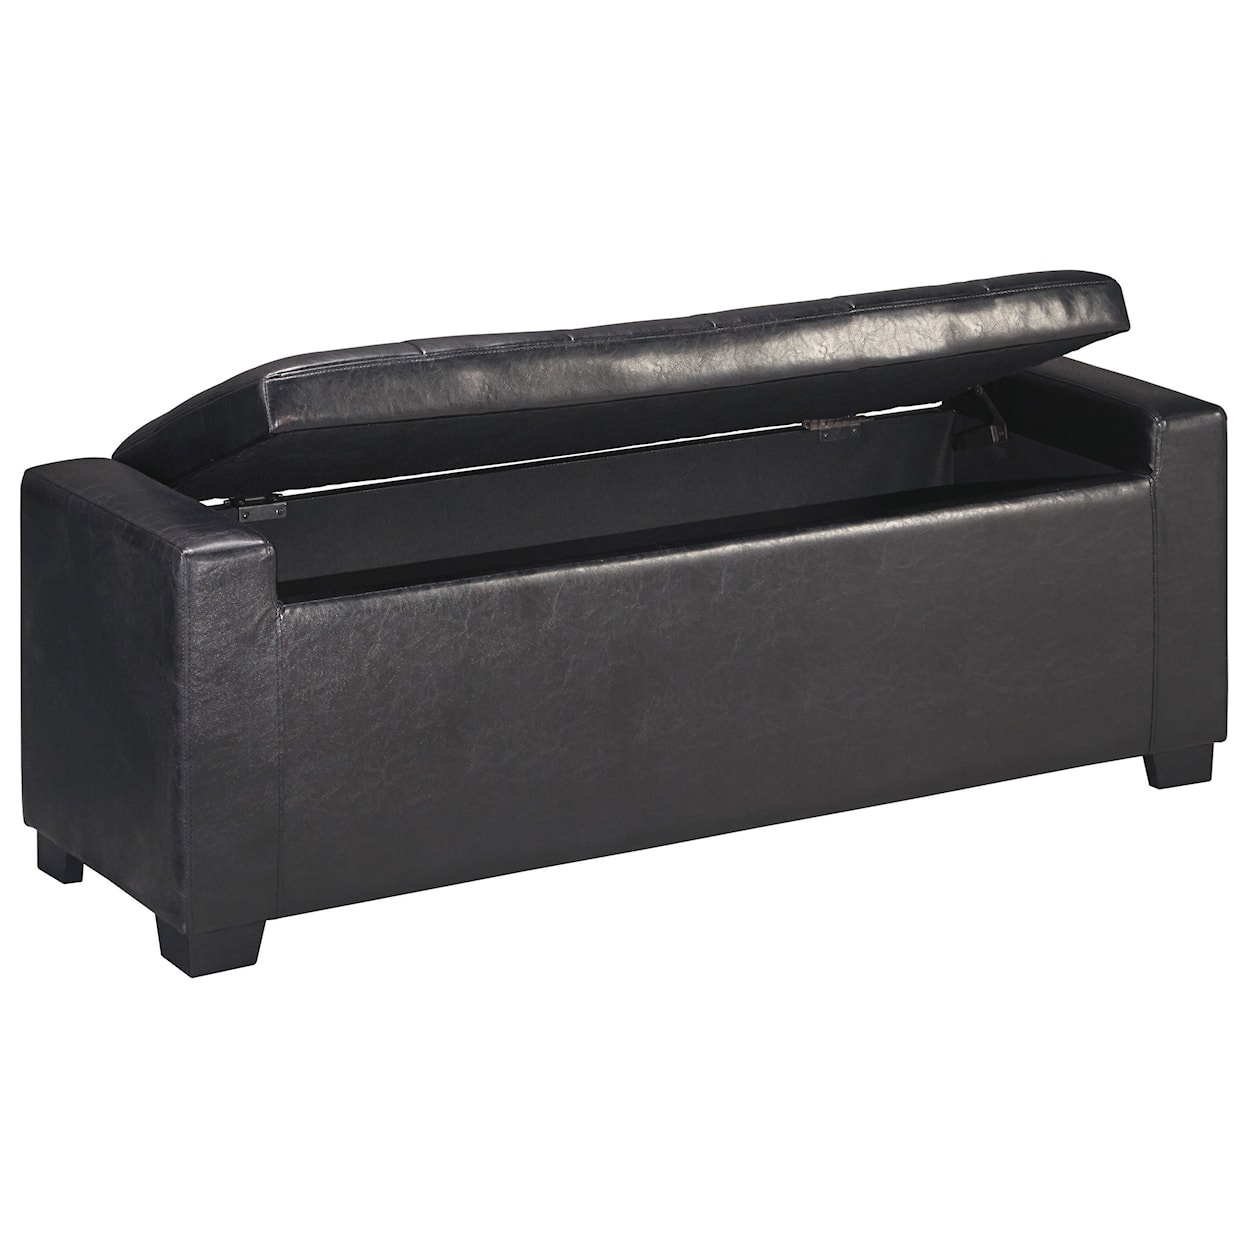 Signature Benches Upholstered Storage Bench